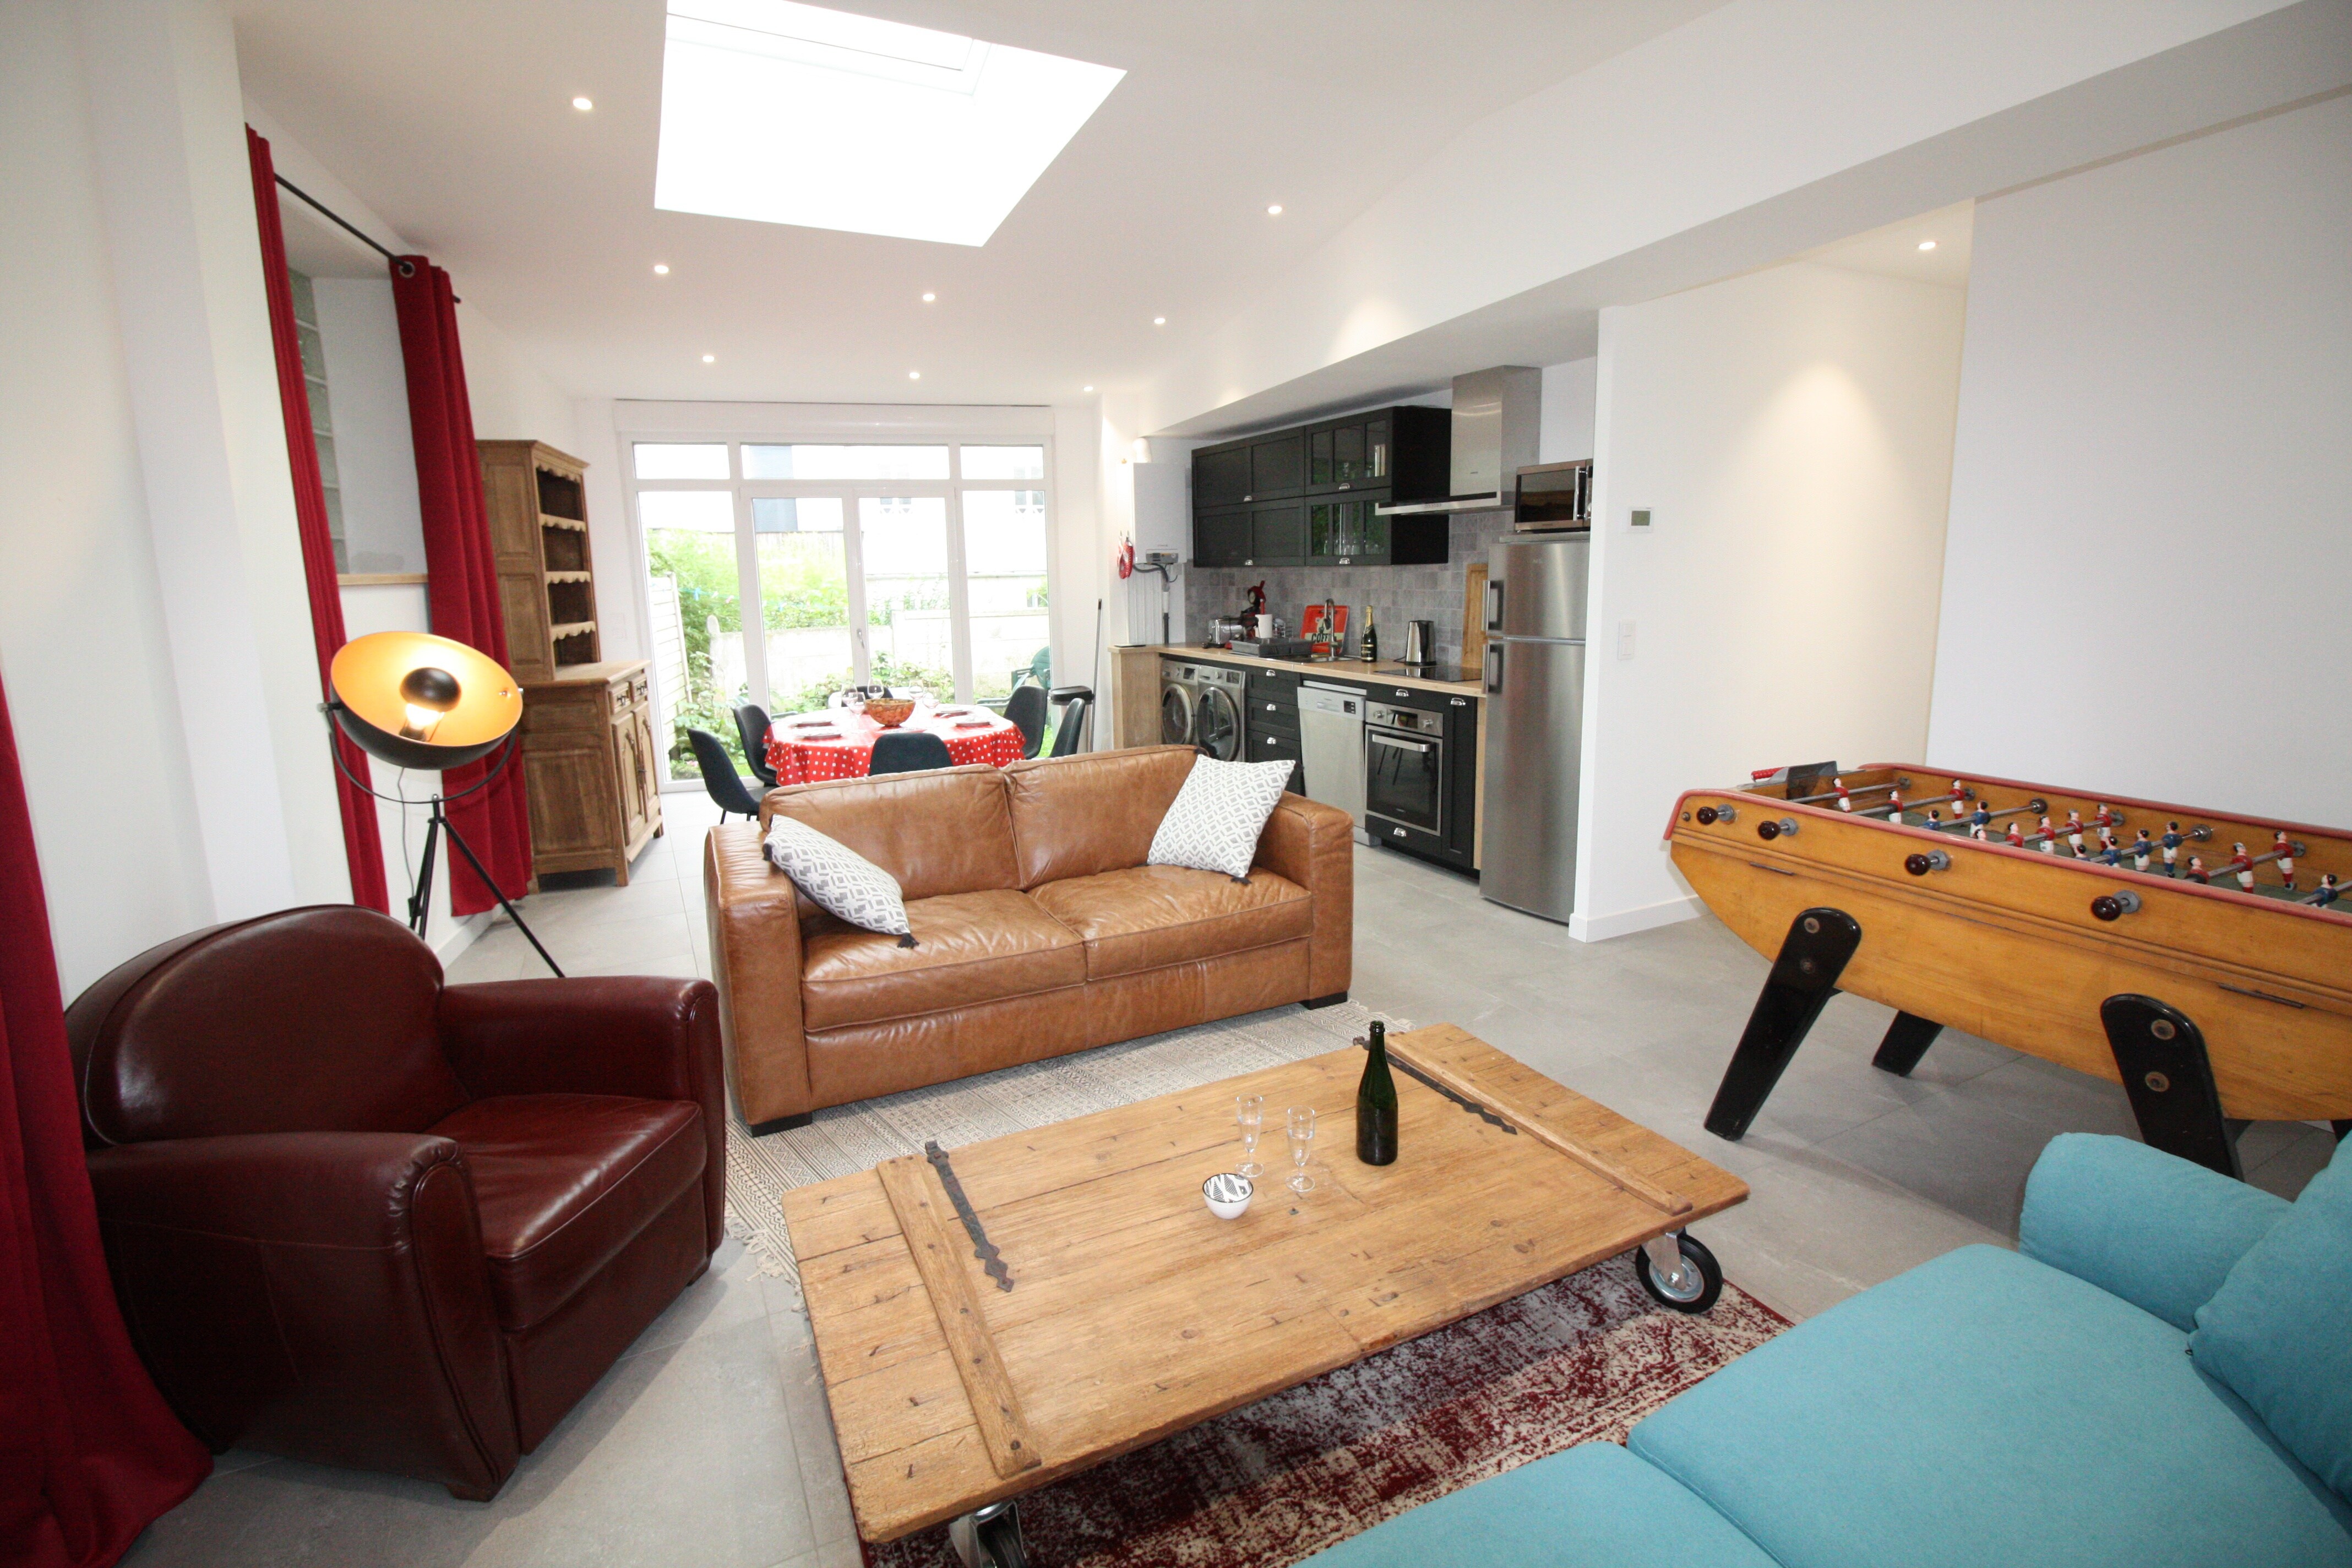 Property Image 1 - Comfortable three bedroom home with fussball near Cap Gris Nez